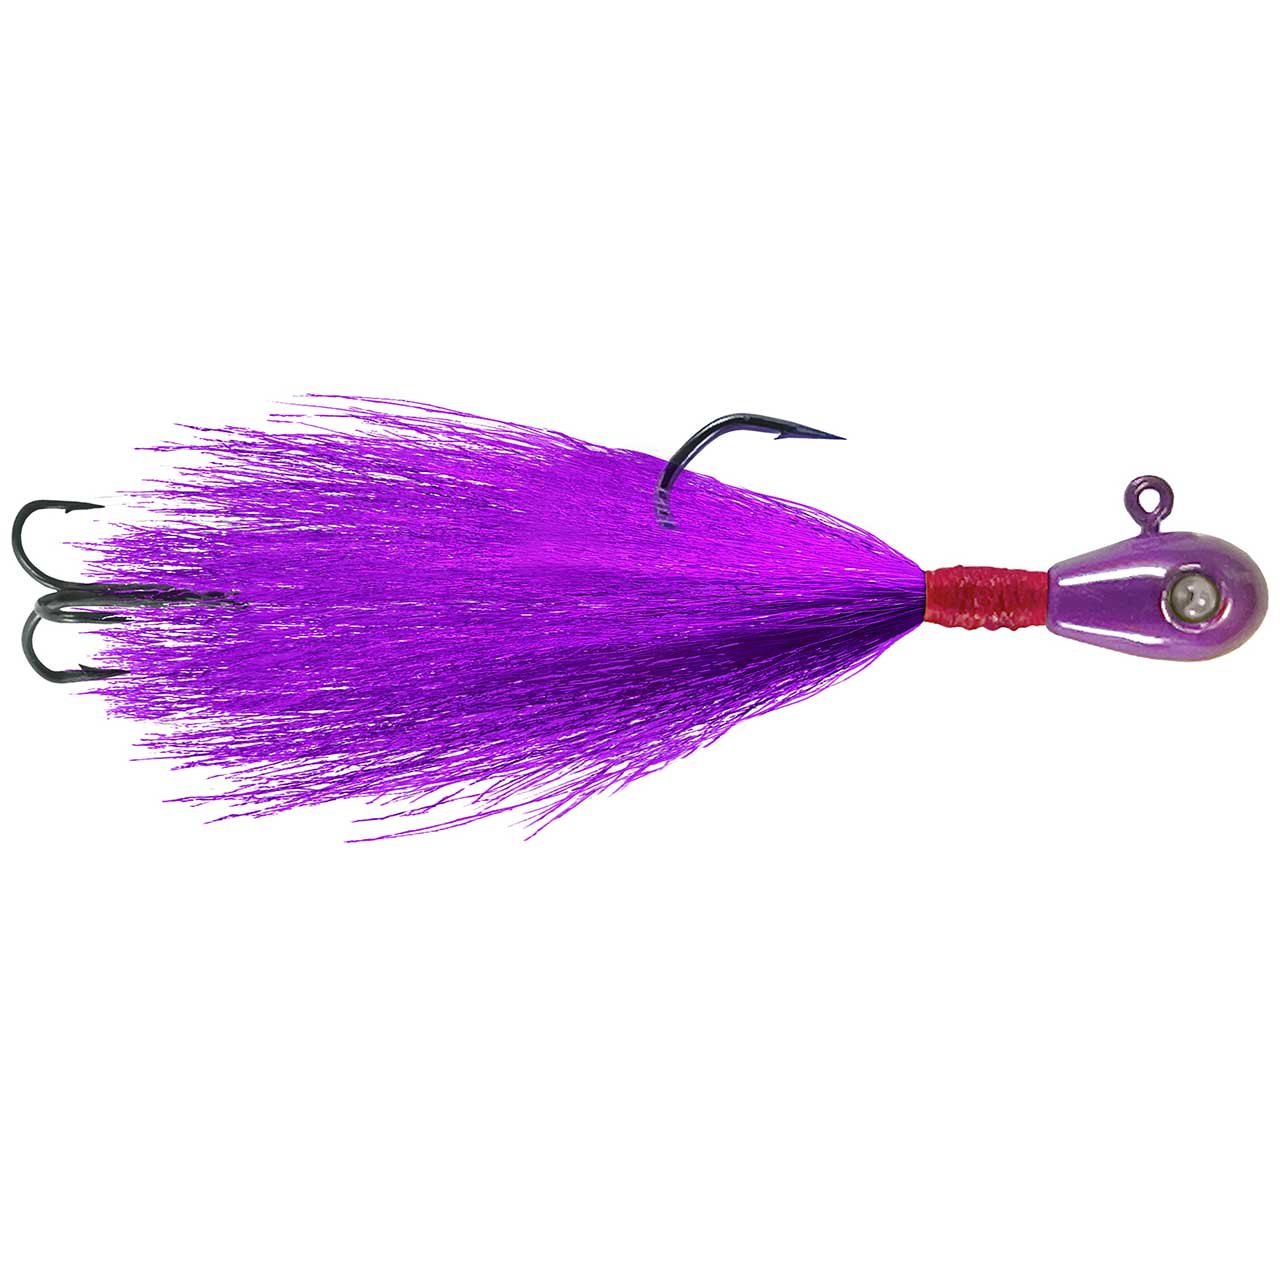 Swim Jig Heads - Calling on Experts - Fishing Tackle - Bass Fishing Forums